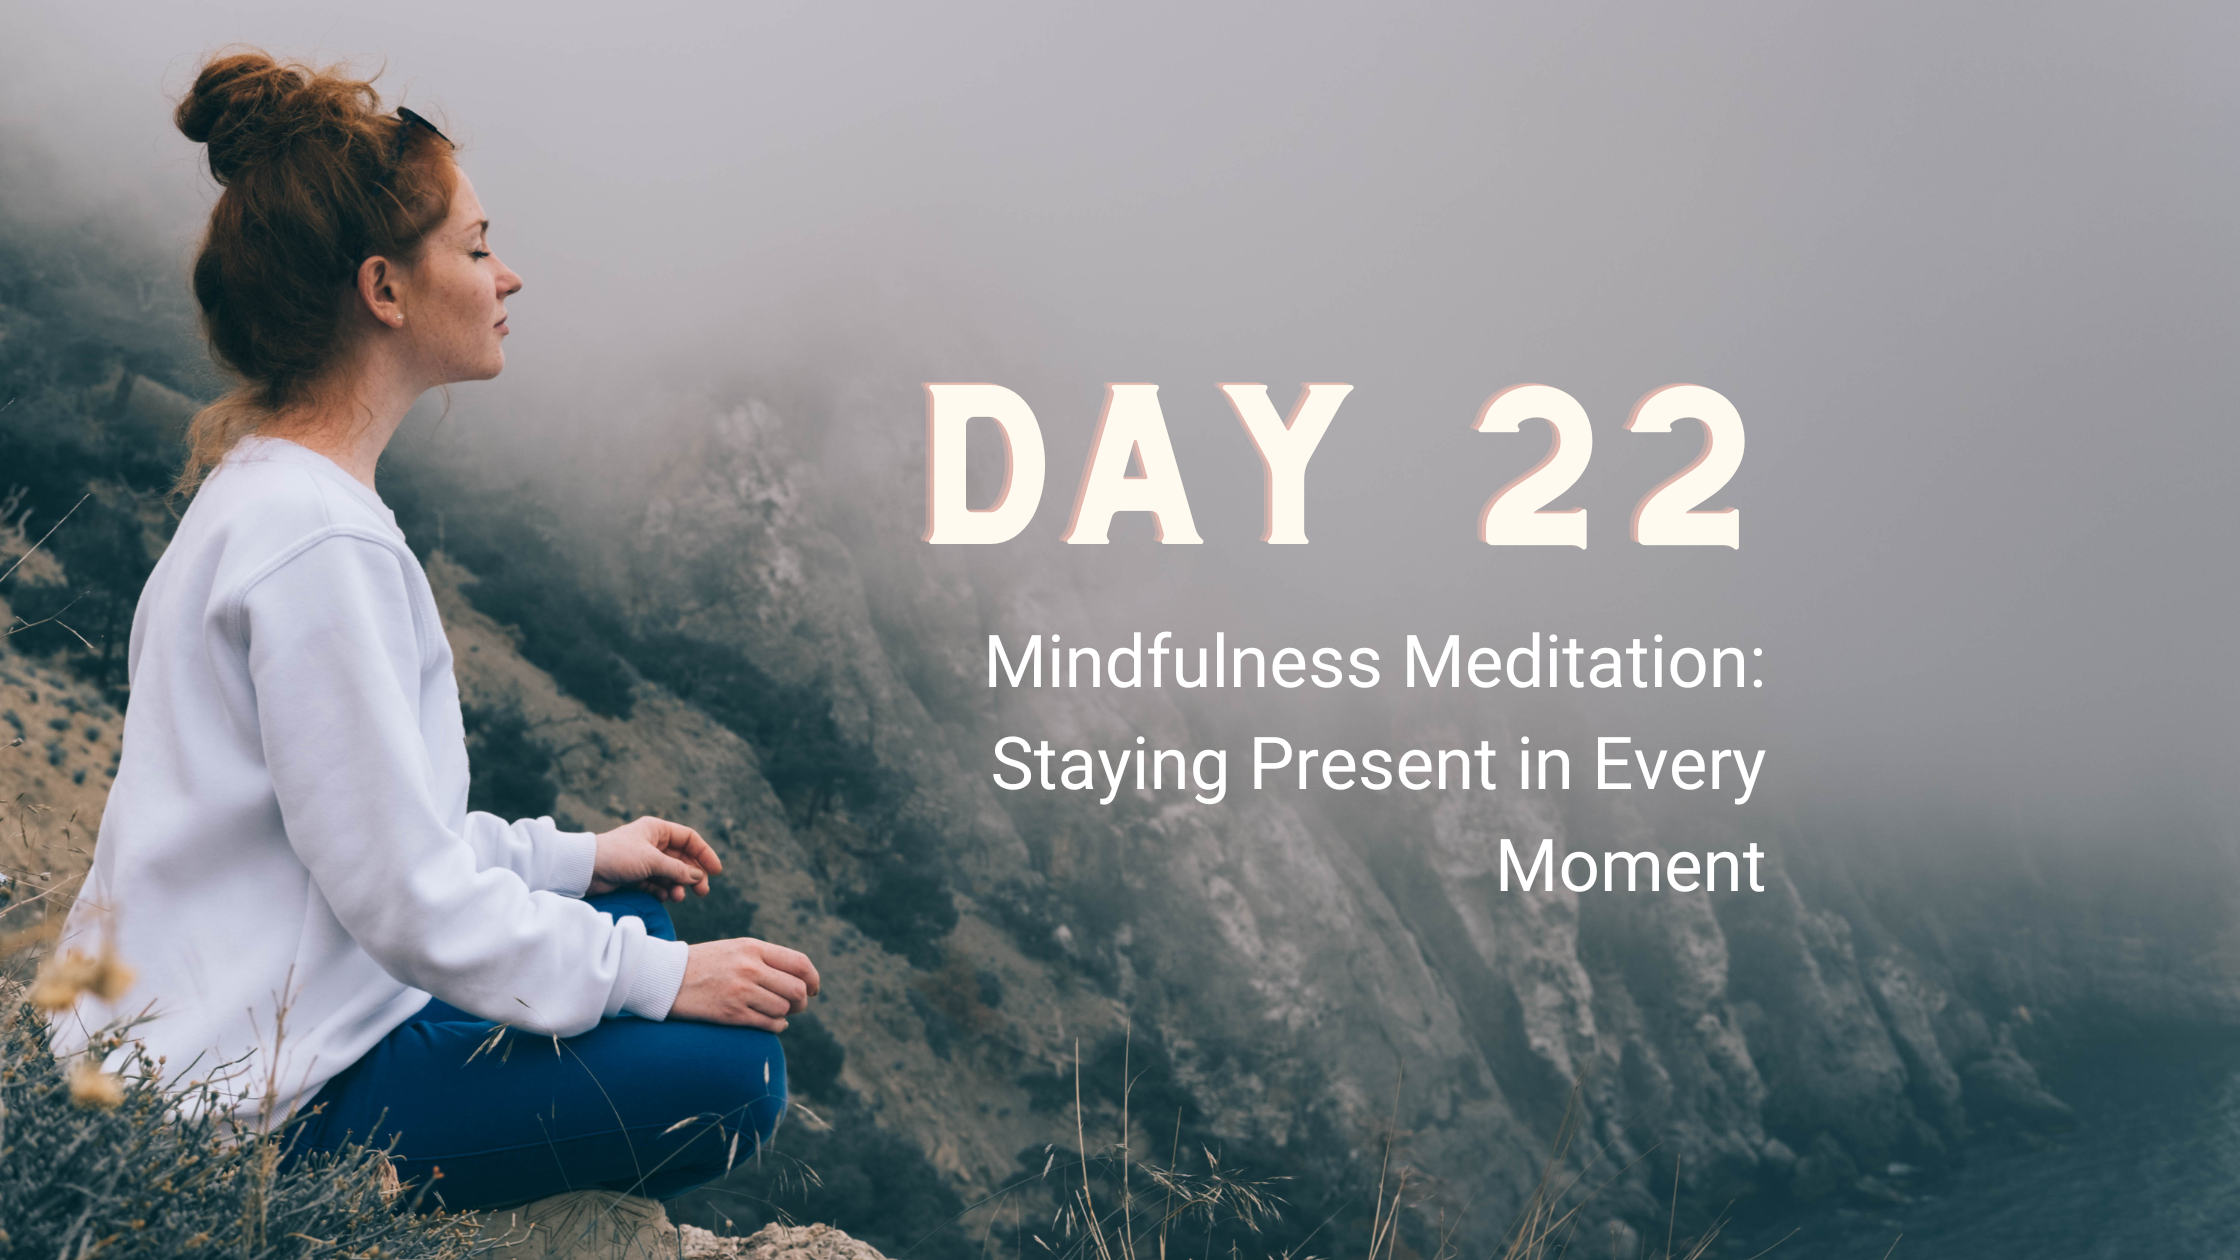 Day 22: Mindfulness Meditation: Staying Present in Every Moment